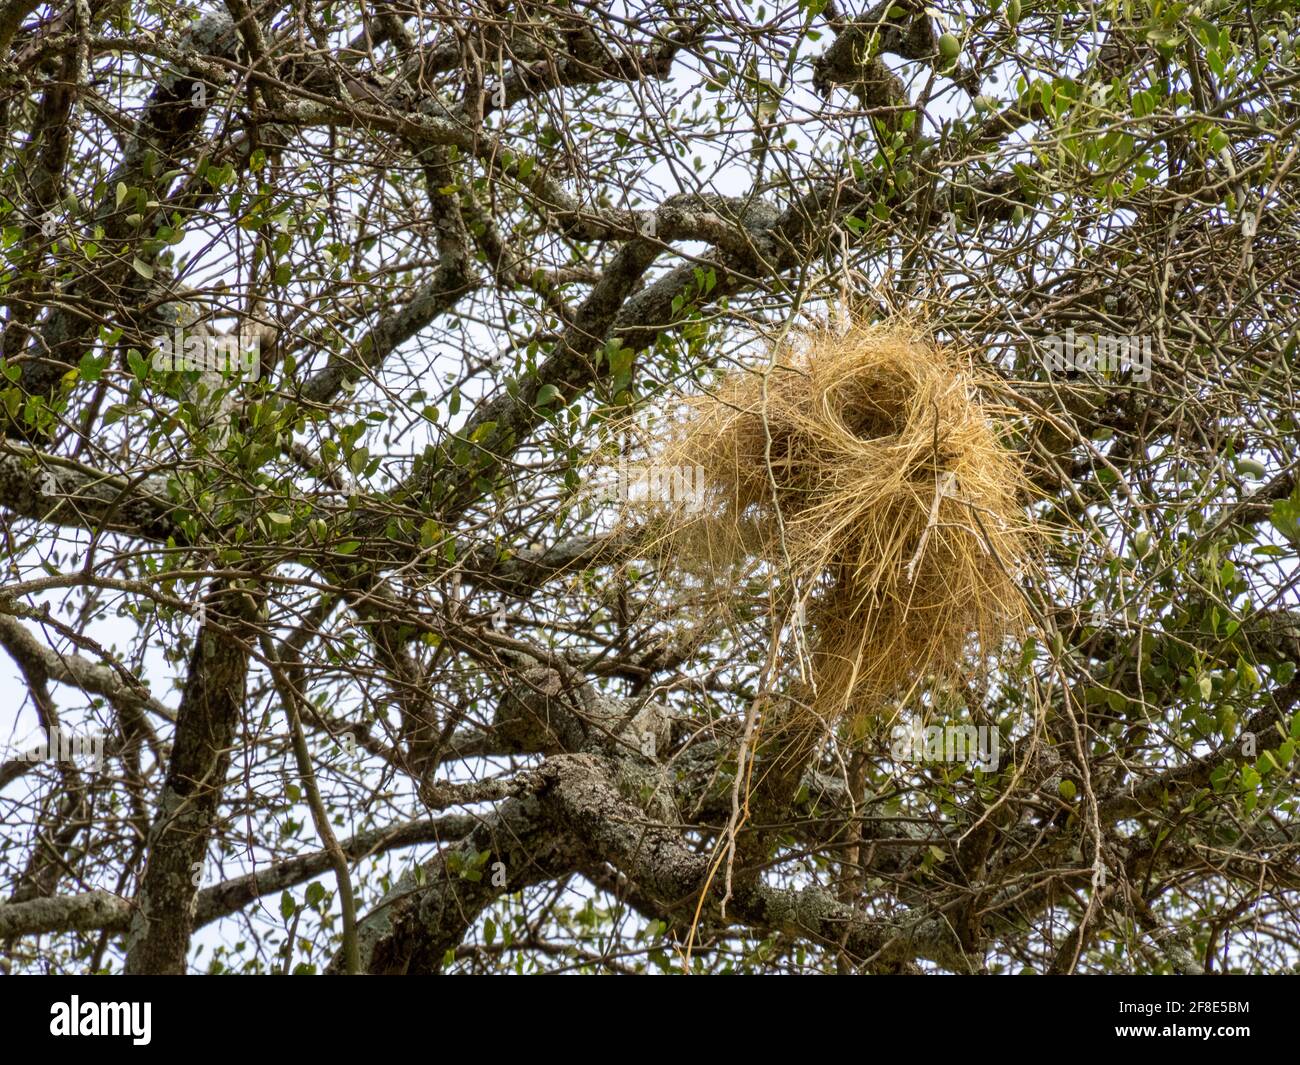 Serengeti National Park, Tanzania, Africa - February 29, 2020: Superb Starling nest hanging in a tree Stock Photo